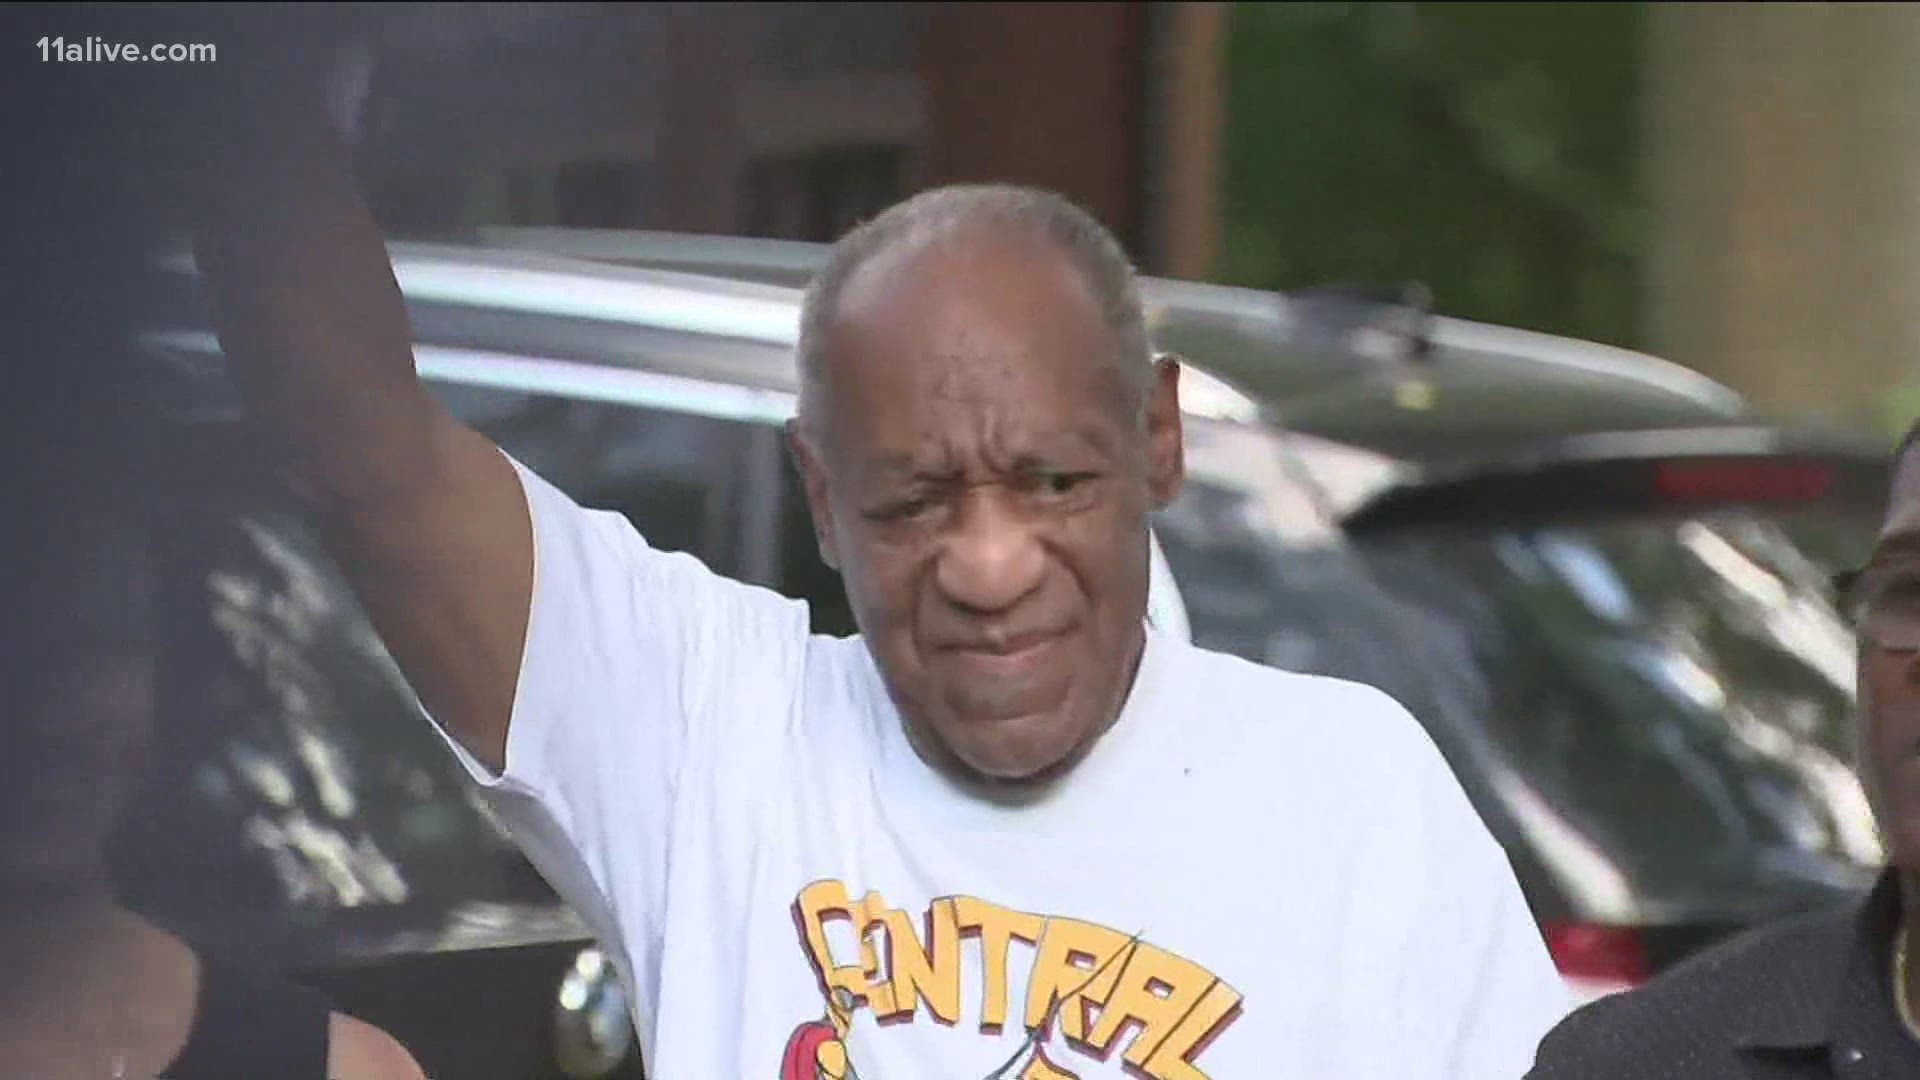 Cosby faced a gaggle of media assembled outside during a press conference, but he didn't speak, only looking toward his legal representatives when asked for comment.